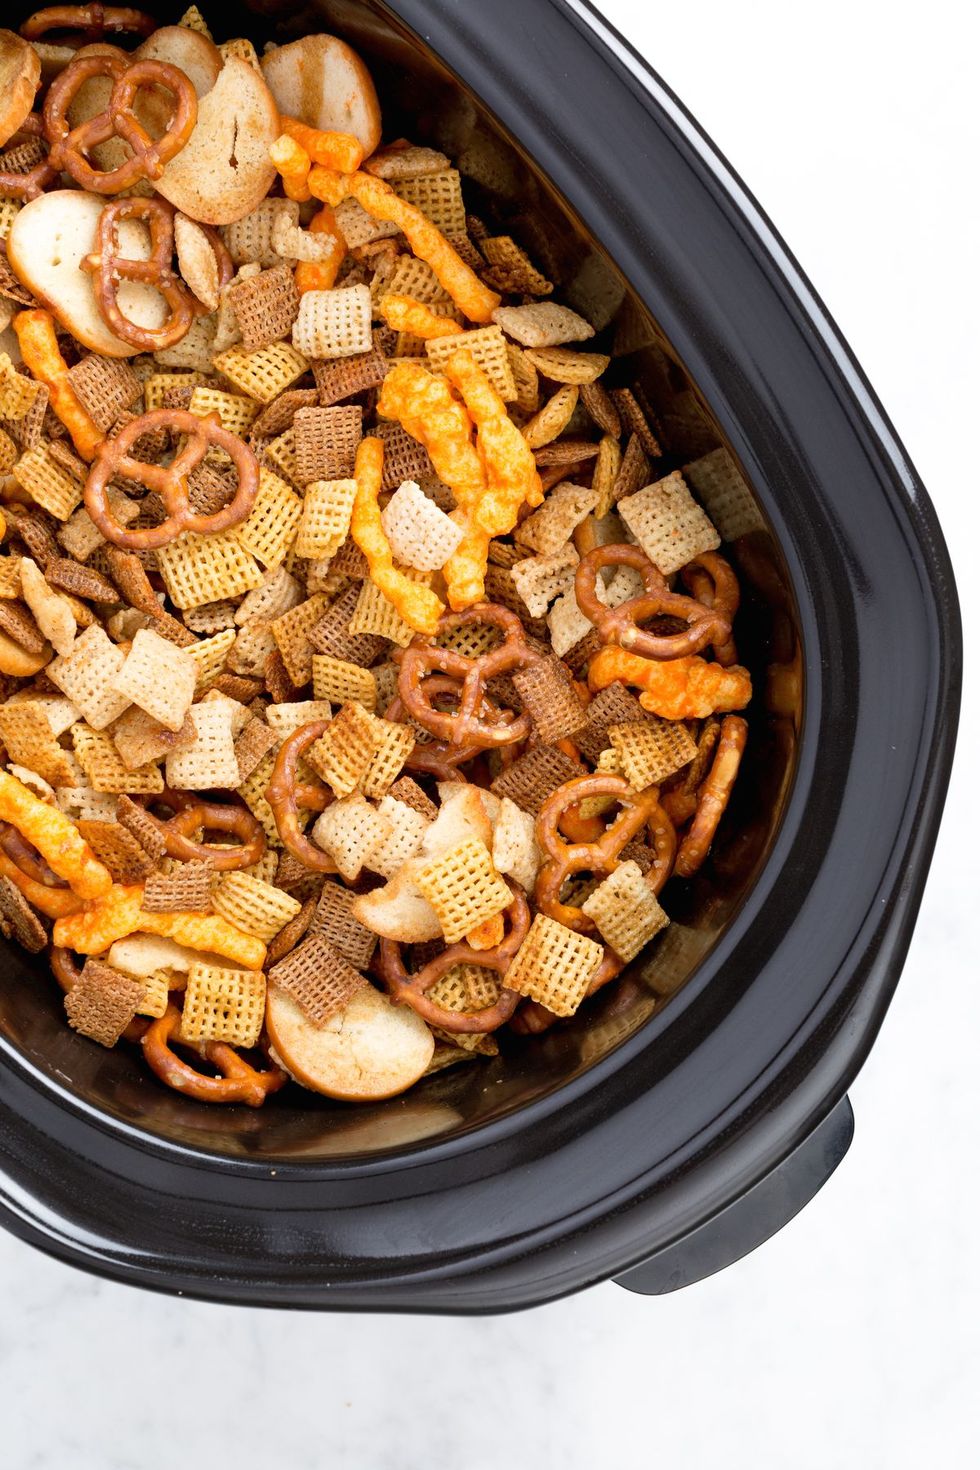 https://hips.hearstapps.com/hmg-prod/images/1445021970-delish-slow-cooker-chex-mix-3-1666651044.jpg?crop=1xw:1xh;center,top&resize=980:*